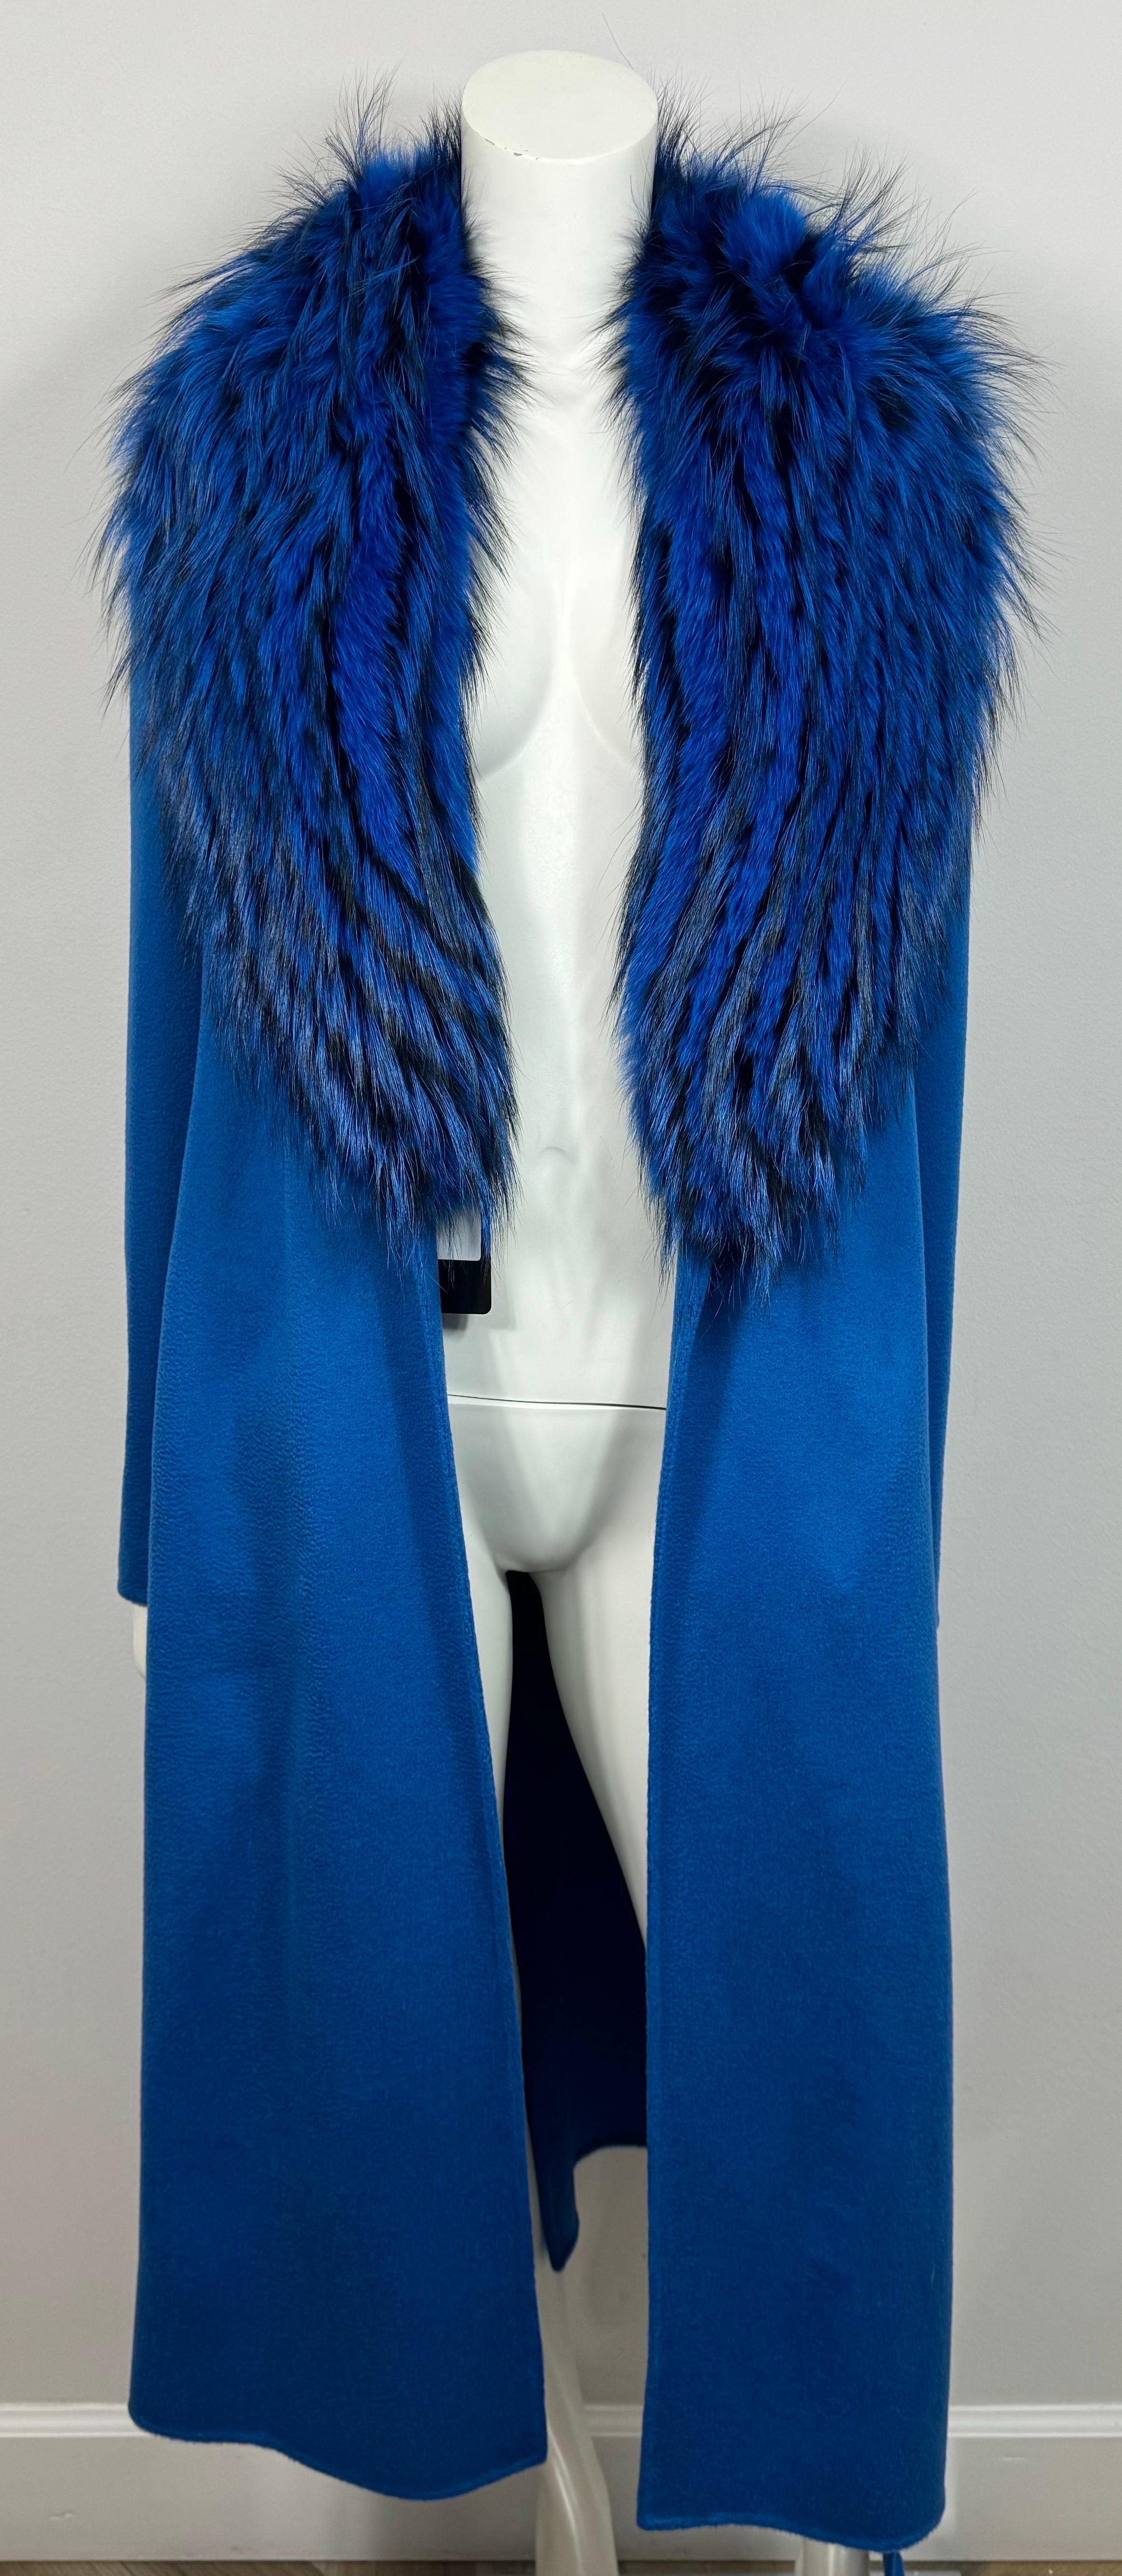 J Mendel Runway Fall 2016 Azure Cashmere Coat with Fox Fur Collar-Size Small-NWT For Sale 9